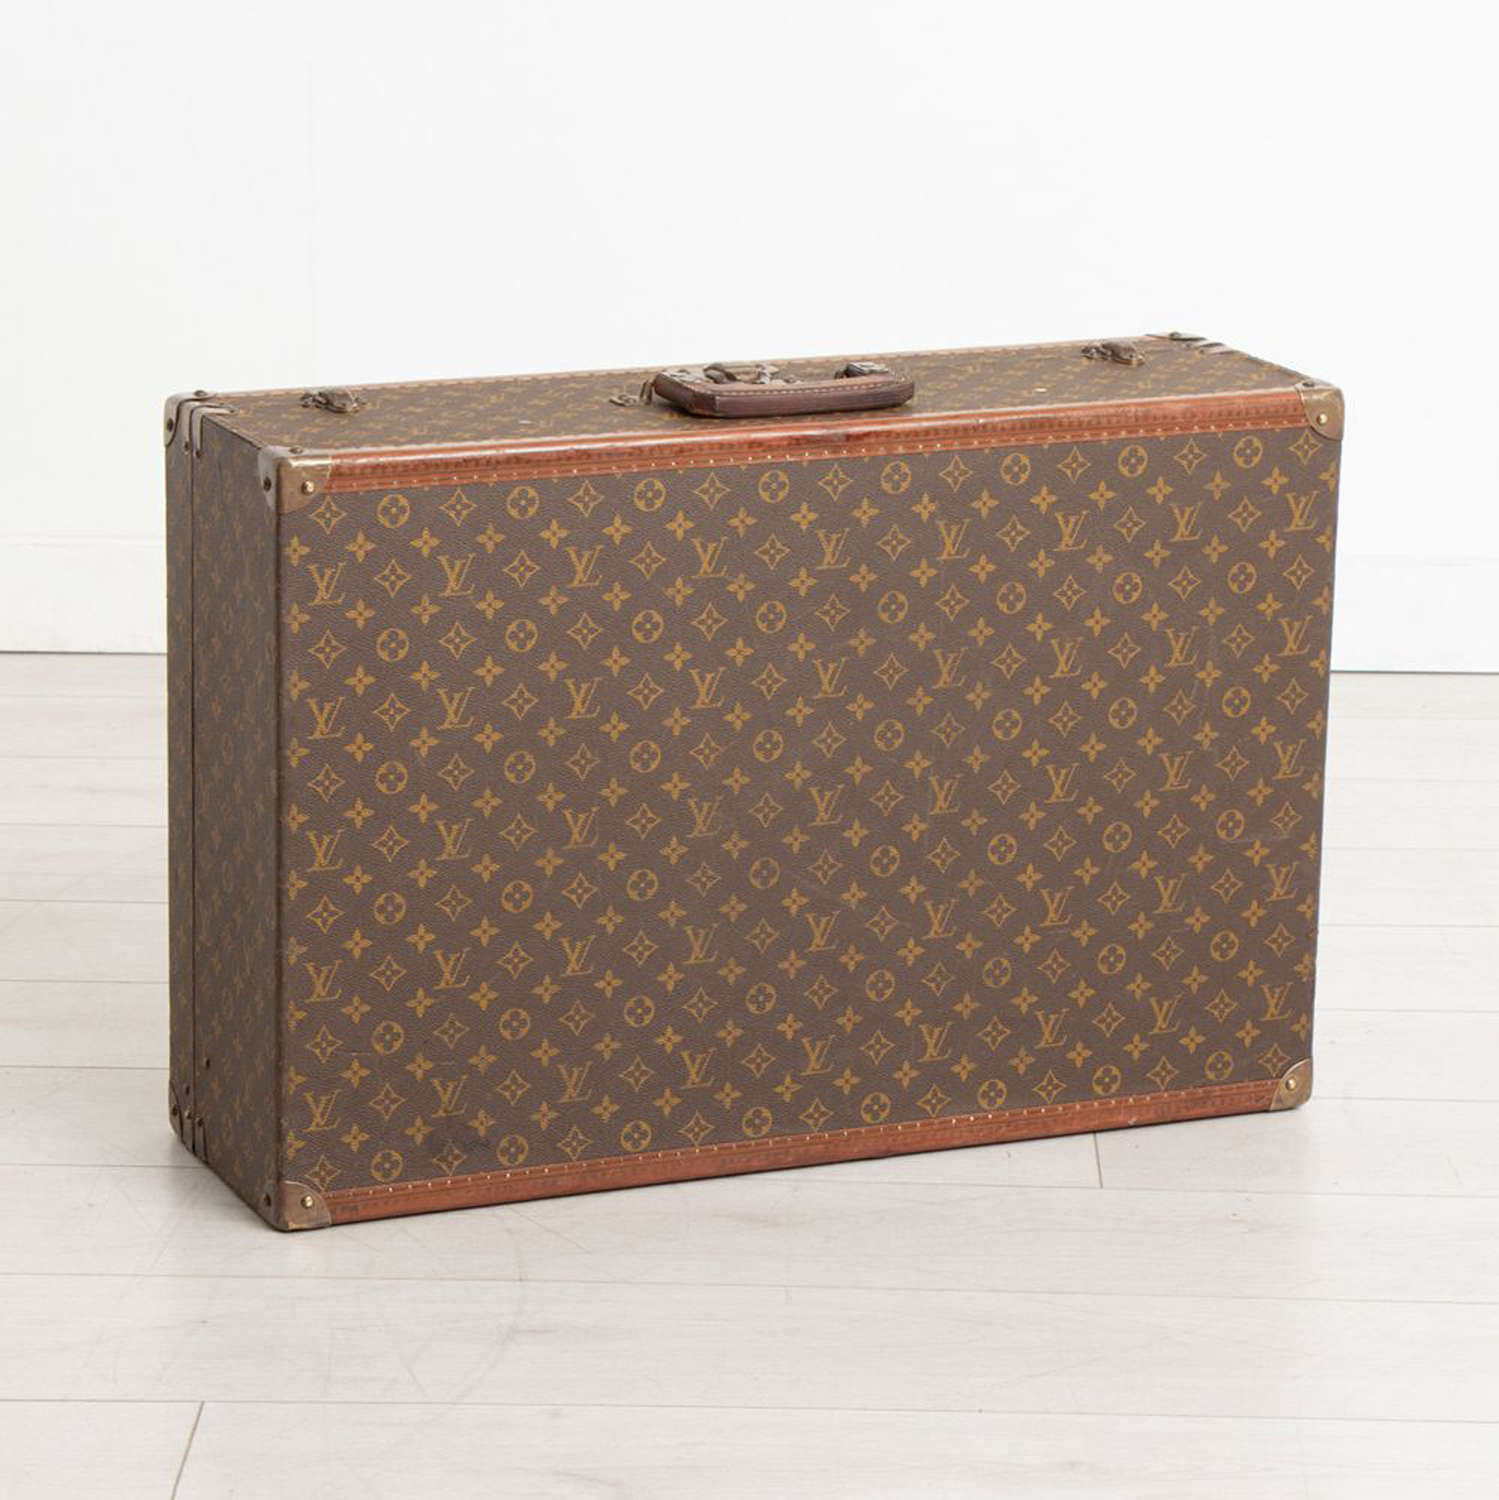 Alzer 70 Suitcase from Louis Vuitton